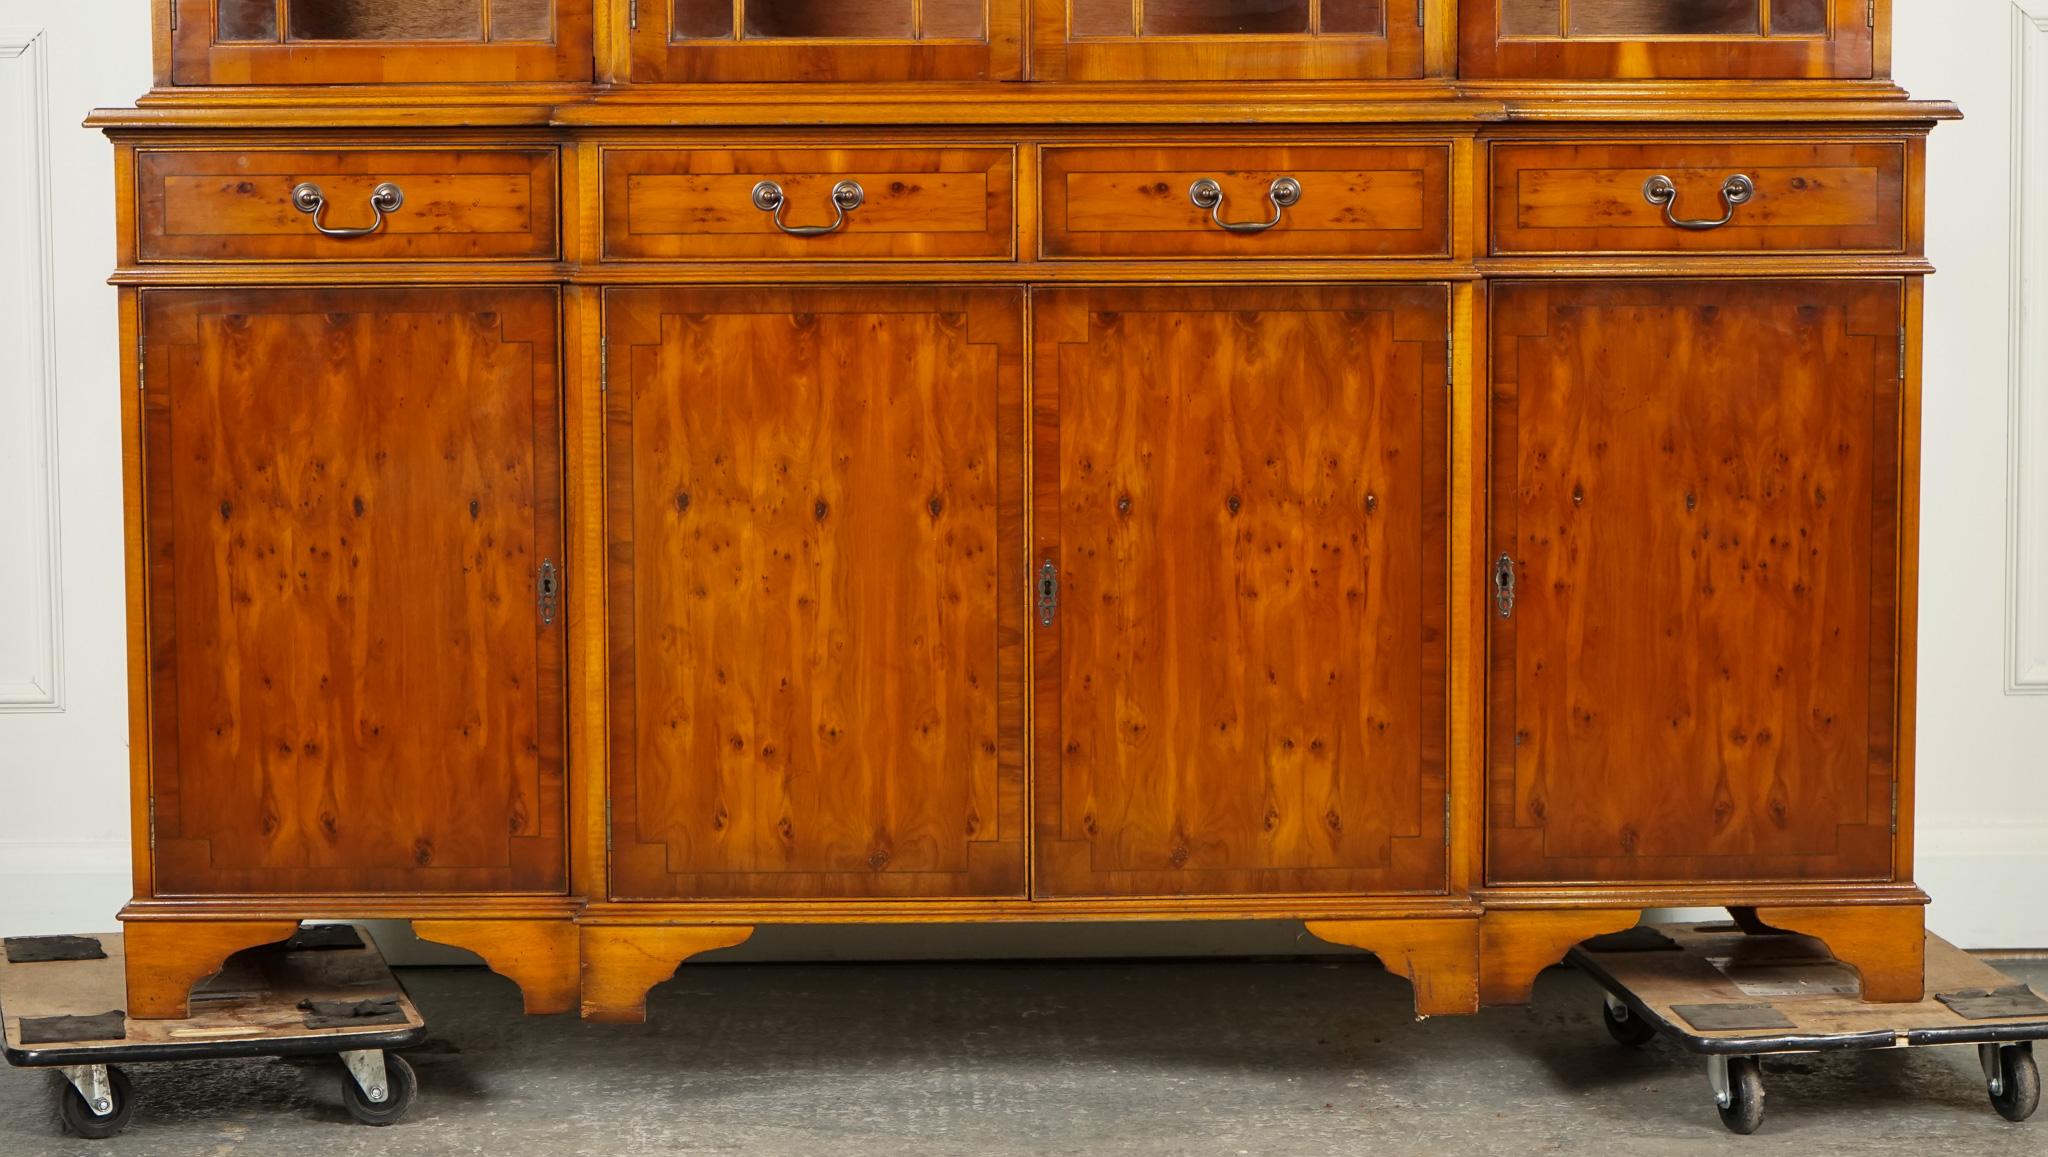 STUNNING VINTAGE BURR YEW WOOD DISPLAY CABiNET BOOKCASE BY CHARLES BARR J1 In Good Condition For Sale In Pulborough, GB